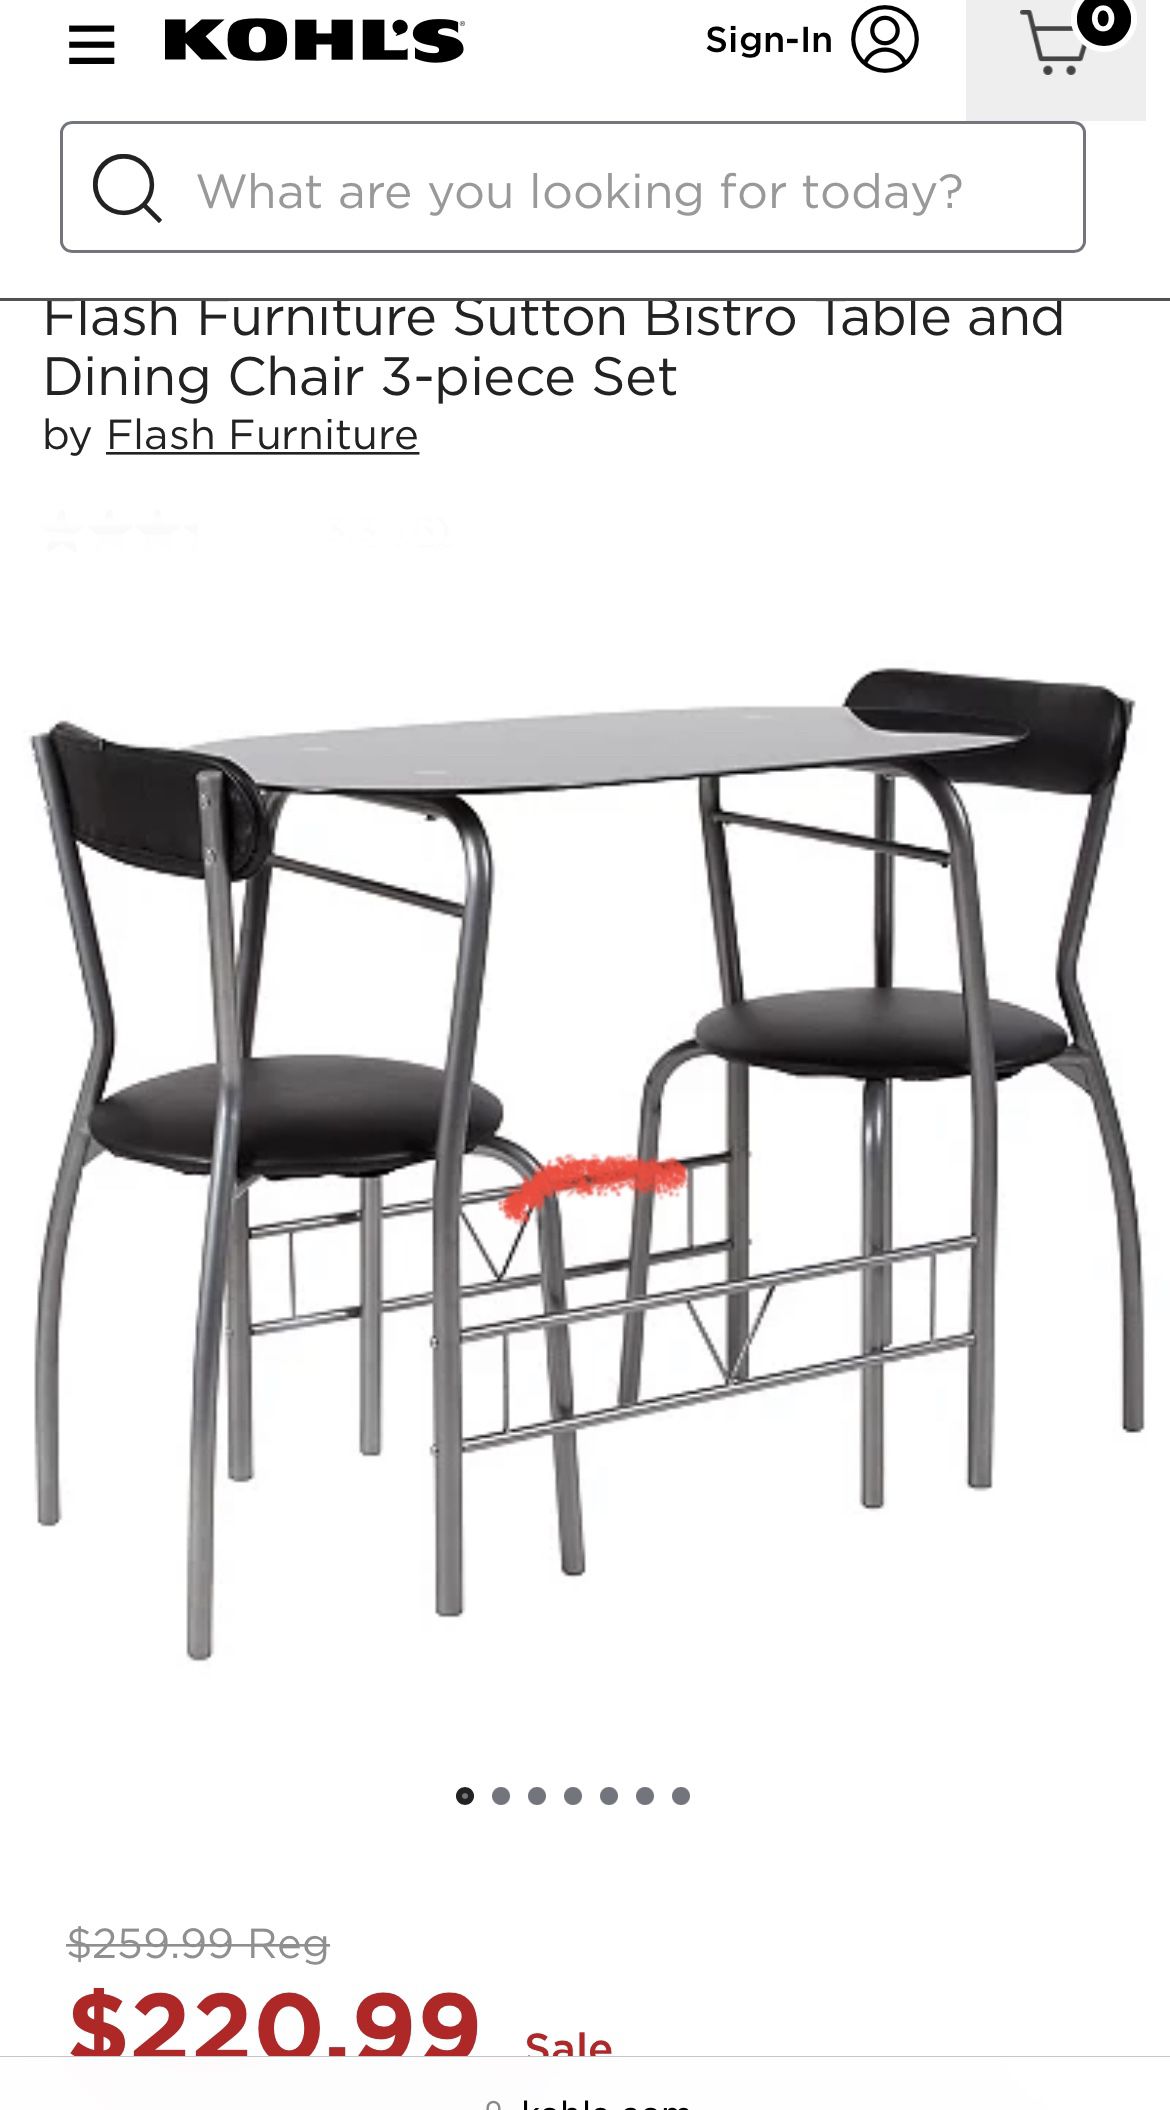 Furniture Sutton Bistro Table and Dining Chair 3-piece Set